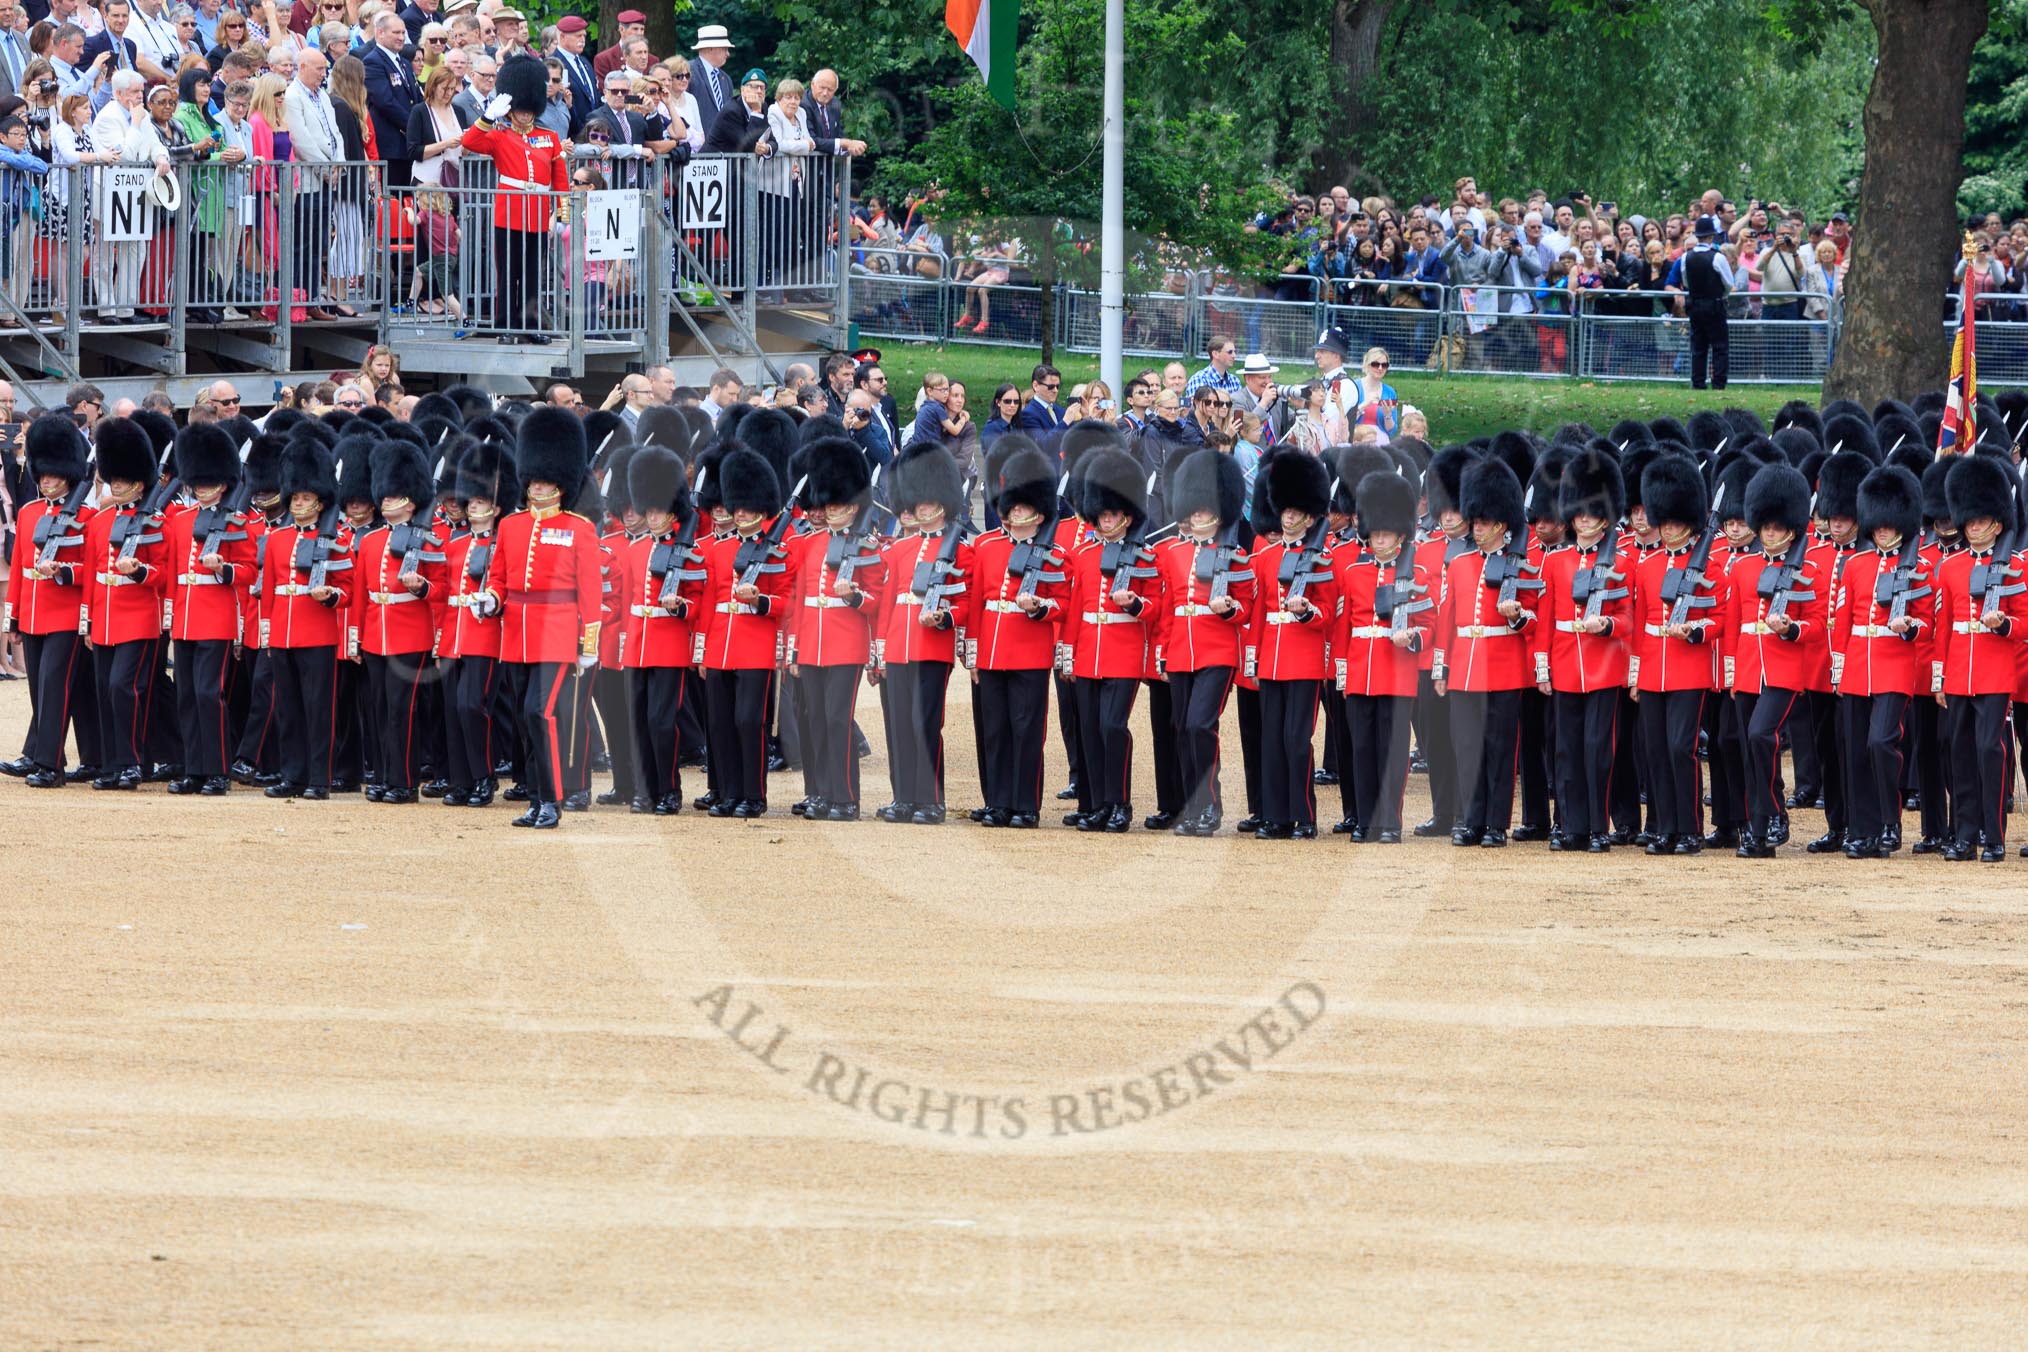 during The Colonel's Review {iptcyear4} (final rehearsal for Trooping the Colour, The Queen's Birthday Parade)  at Horse Guards Parade, Westminster, London, 2 June 2018, 11:34.